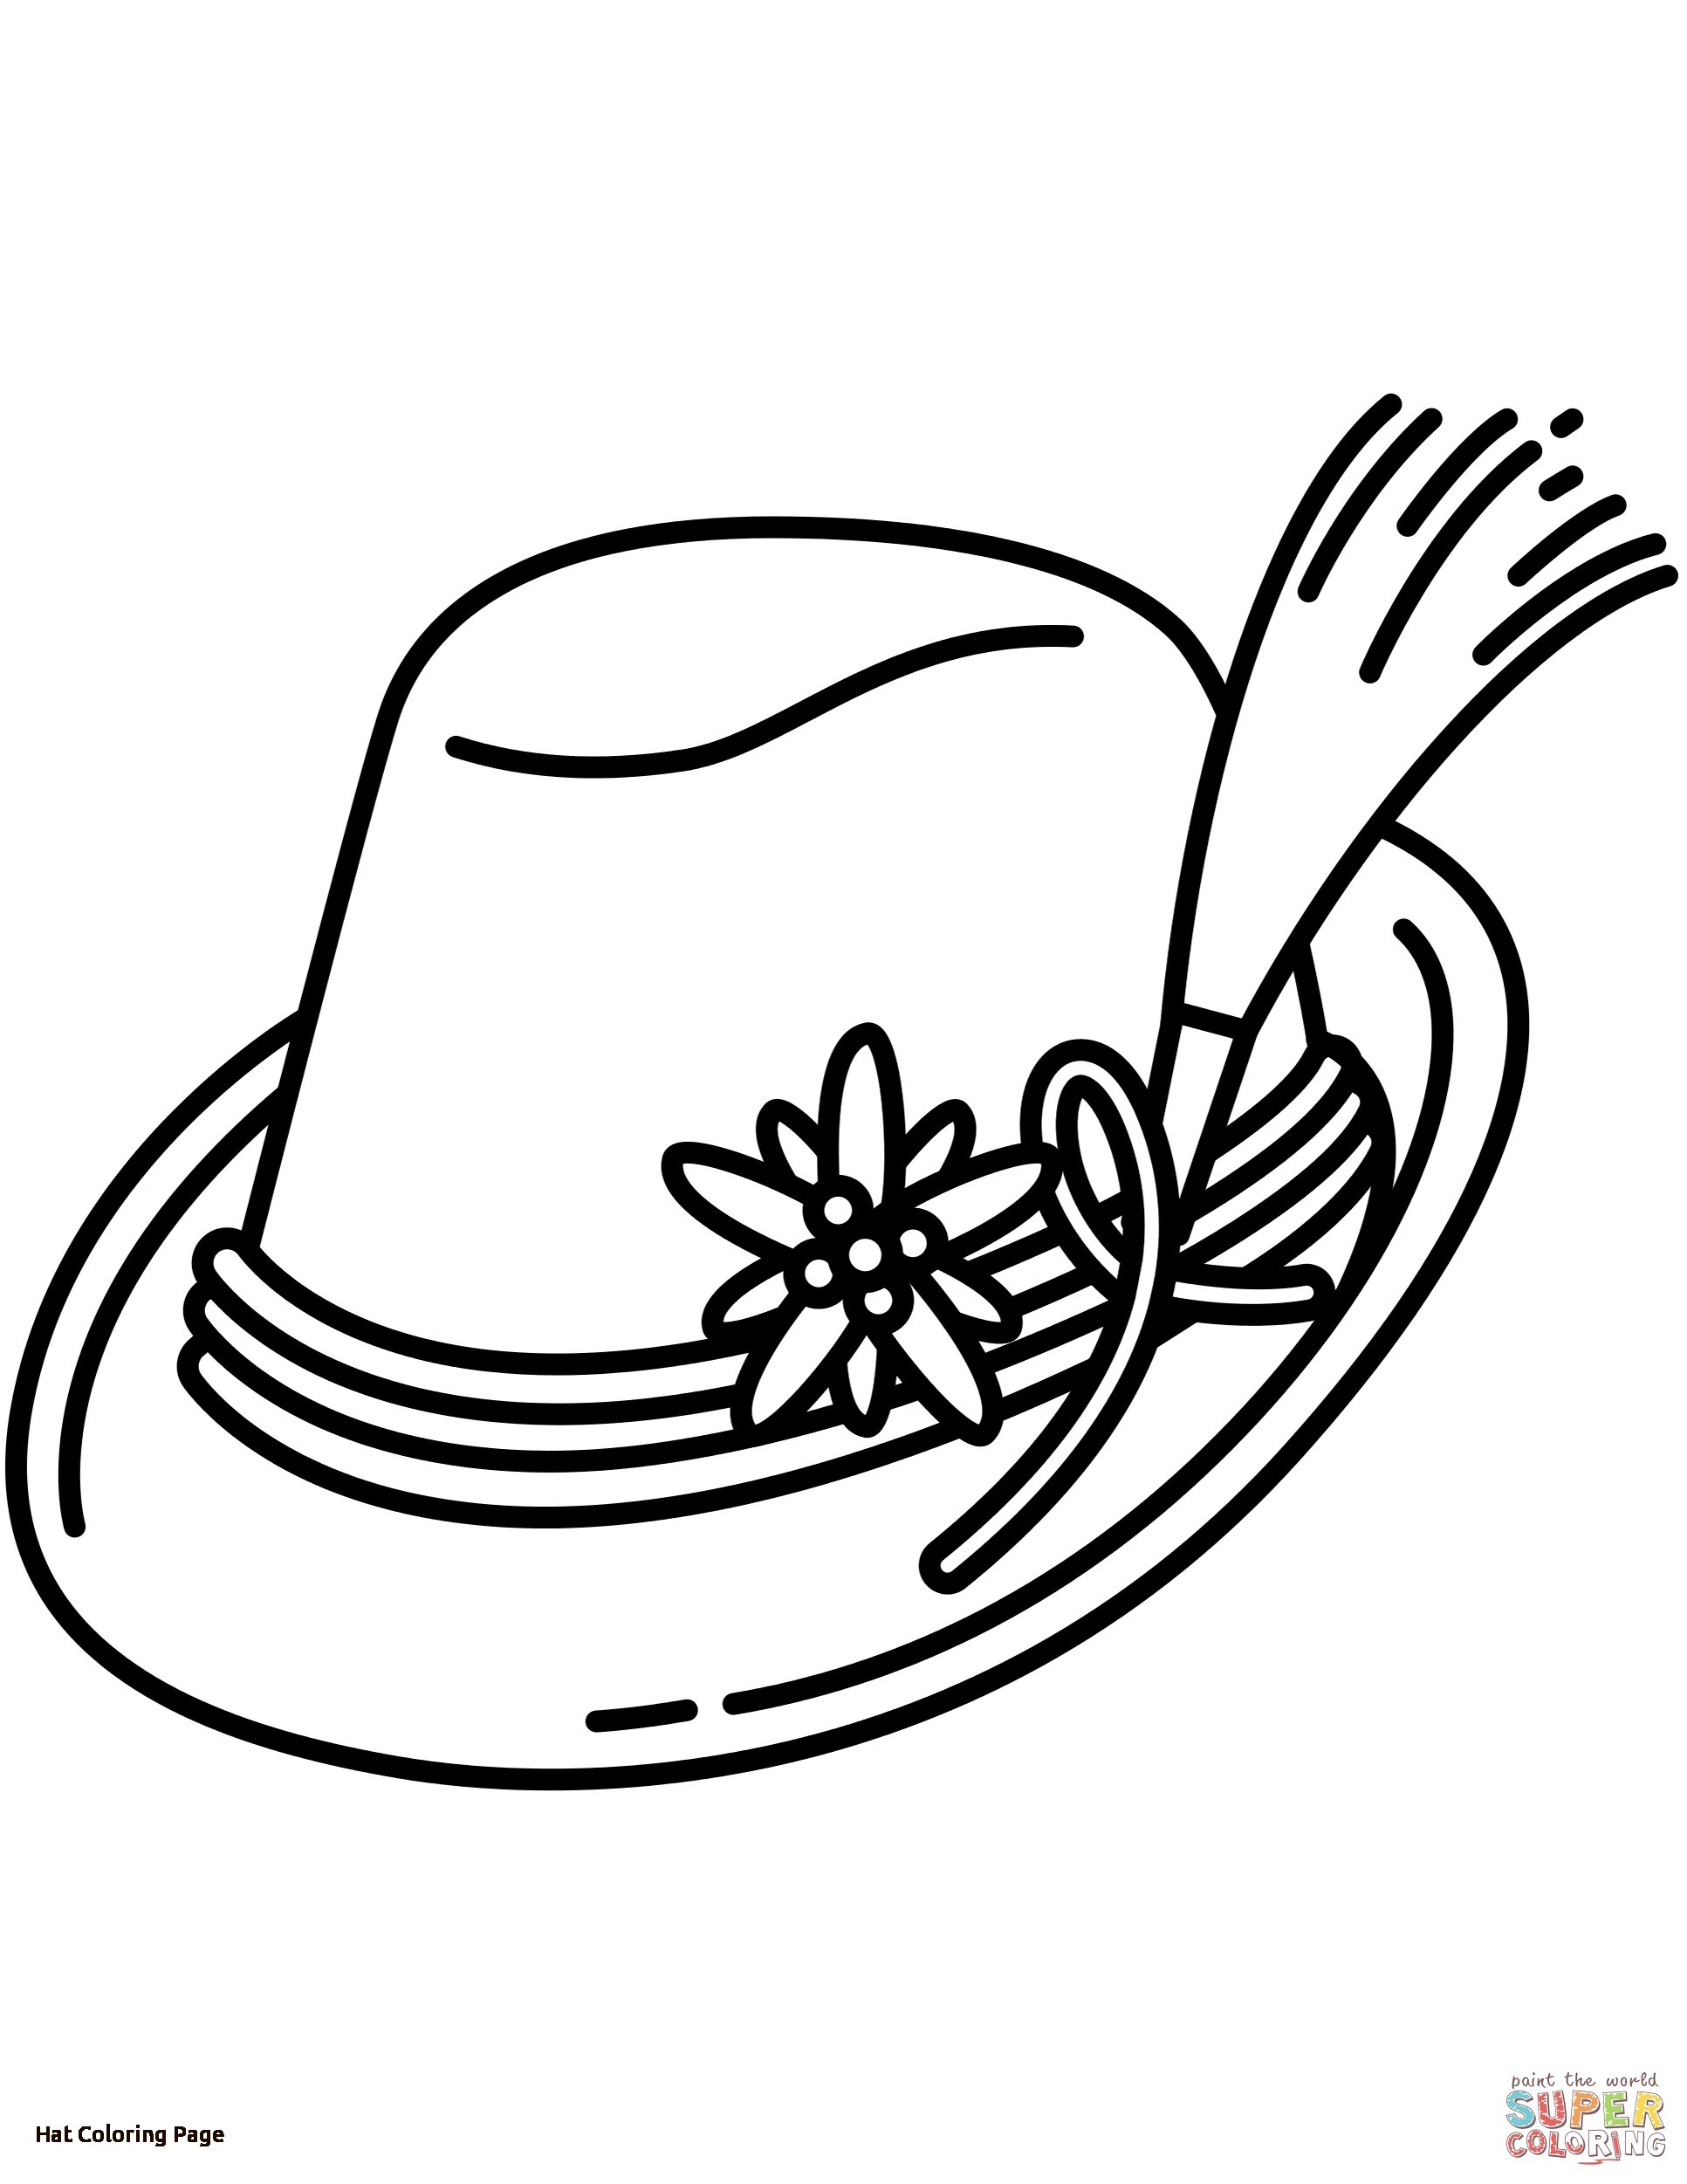 Sun Hat Coloring Page at GetColorings.com | Free printable colorings